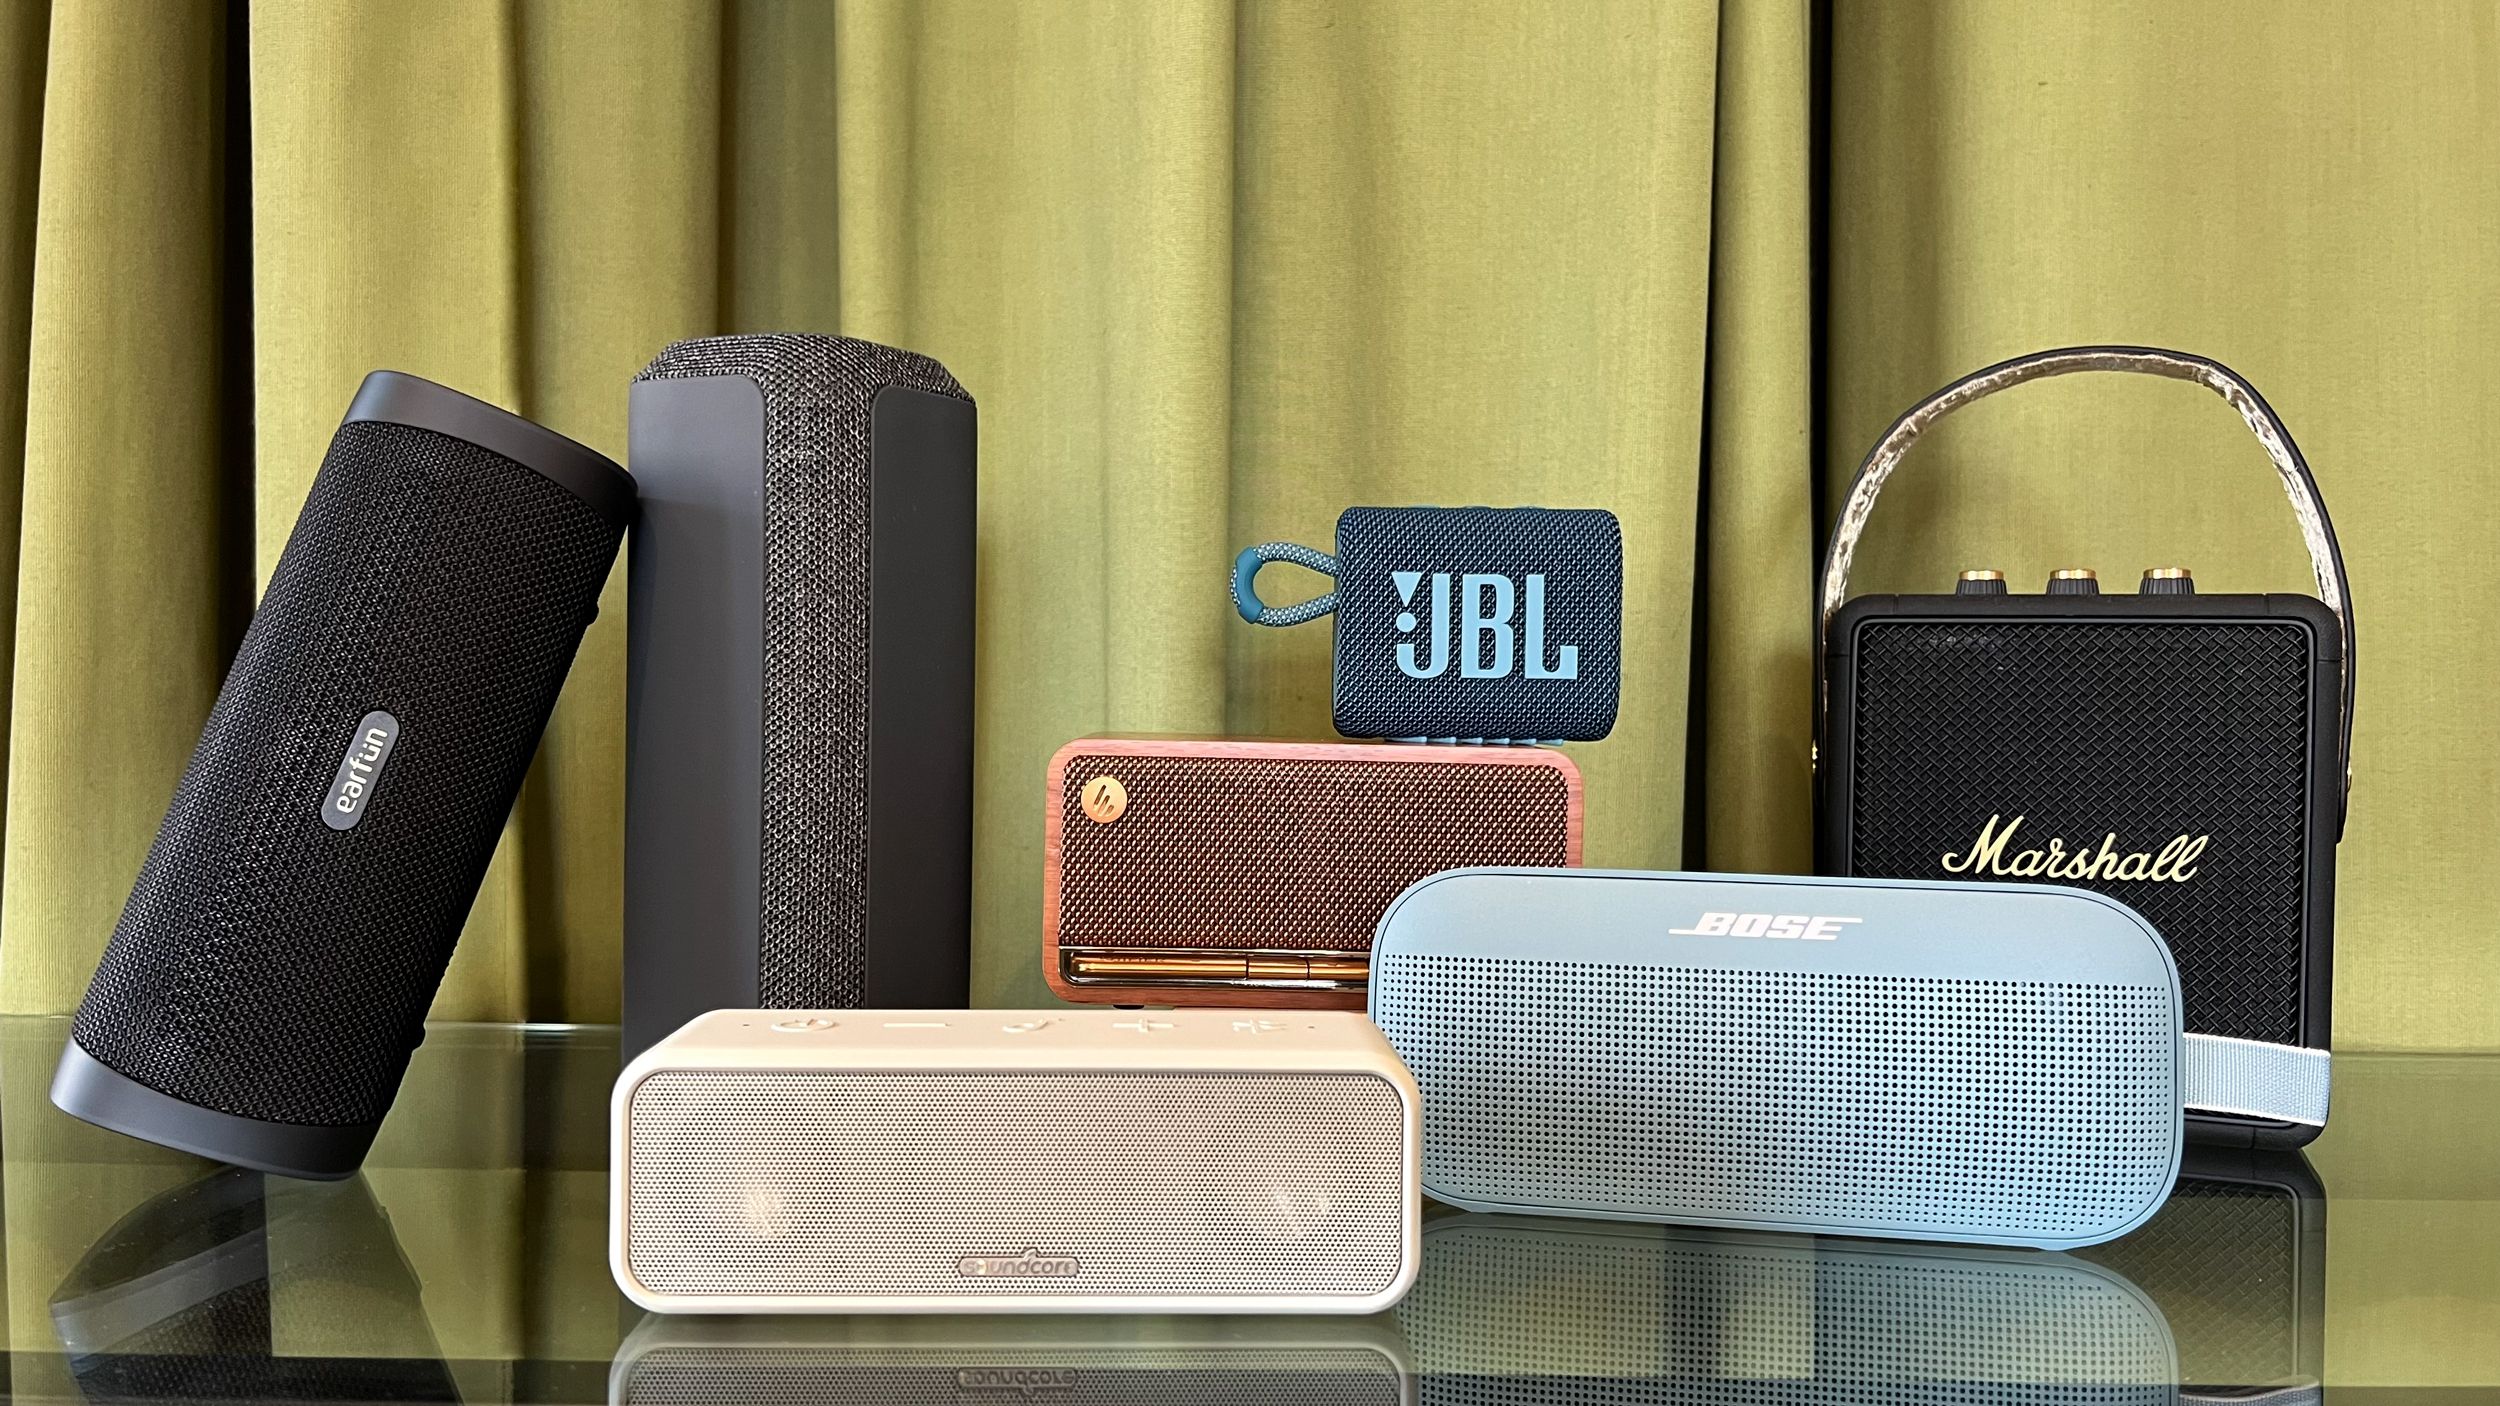 Why the SoundLink Bluetooth Speaker is the Must-Have Gadget of the Year!